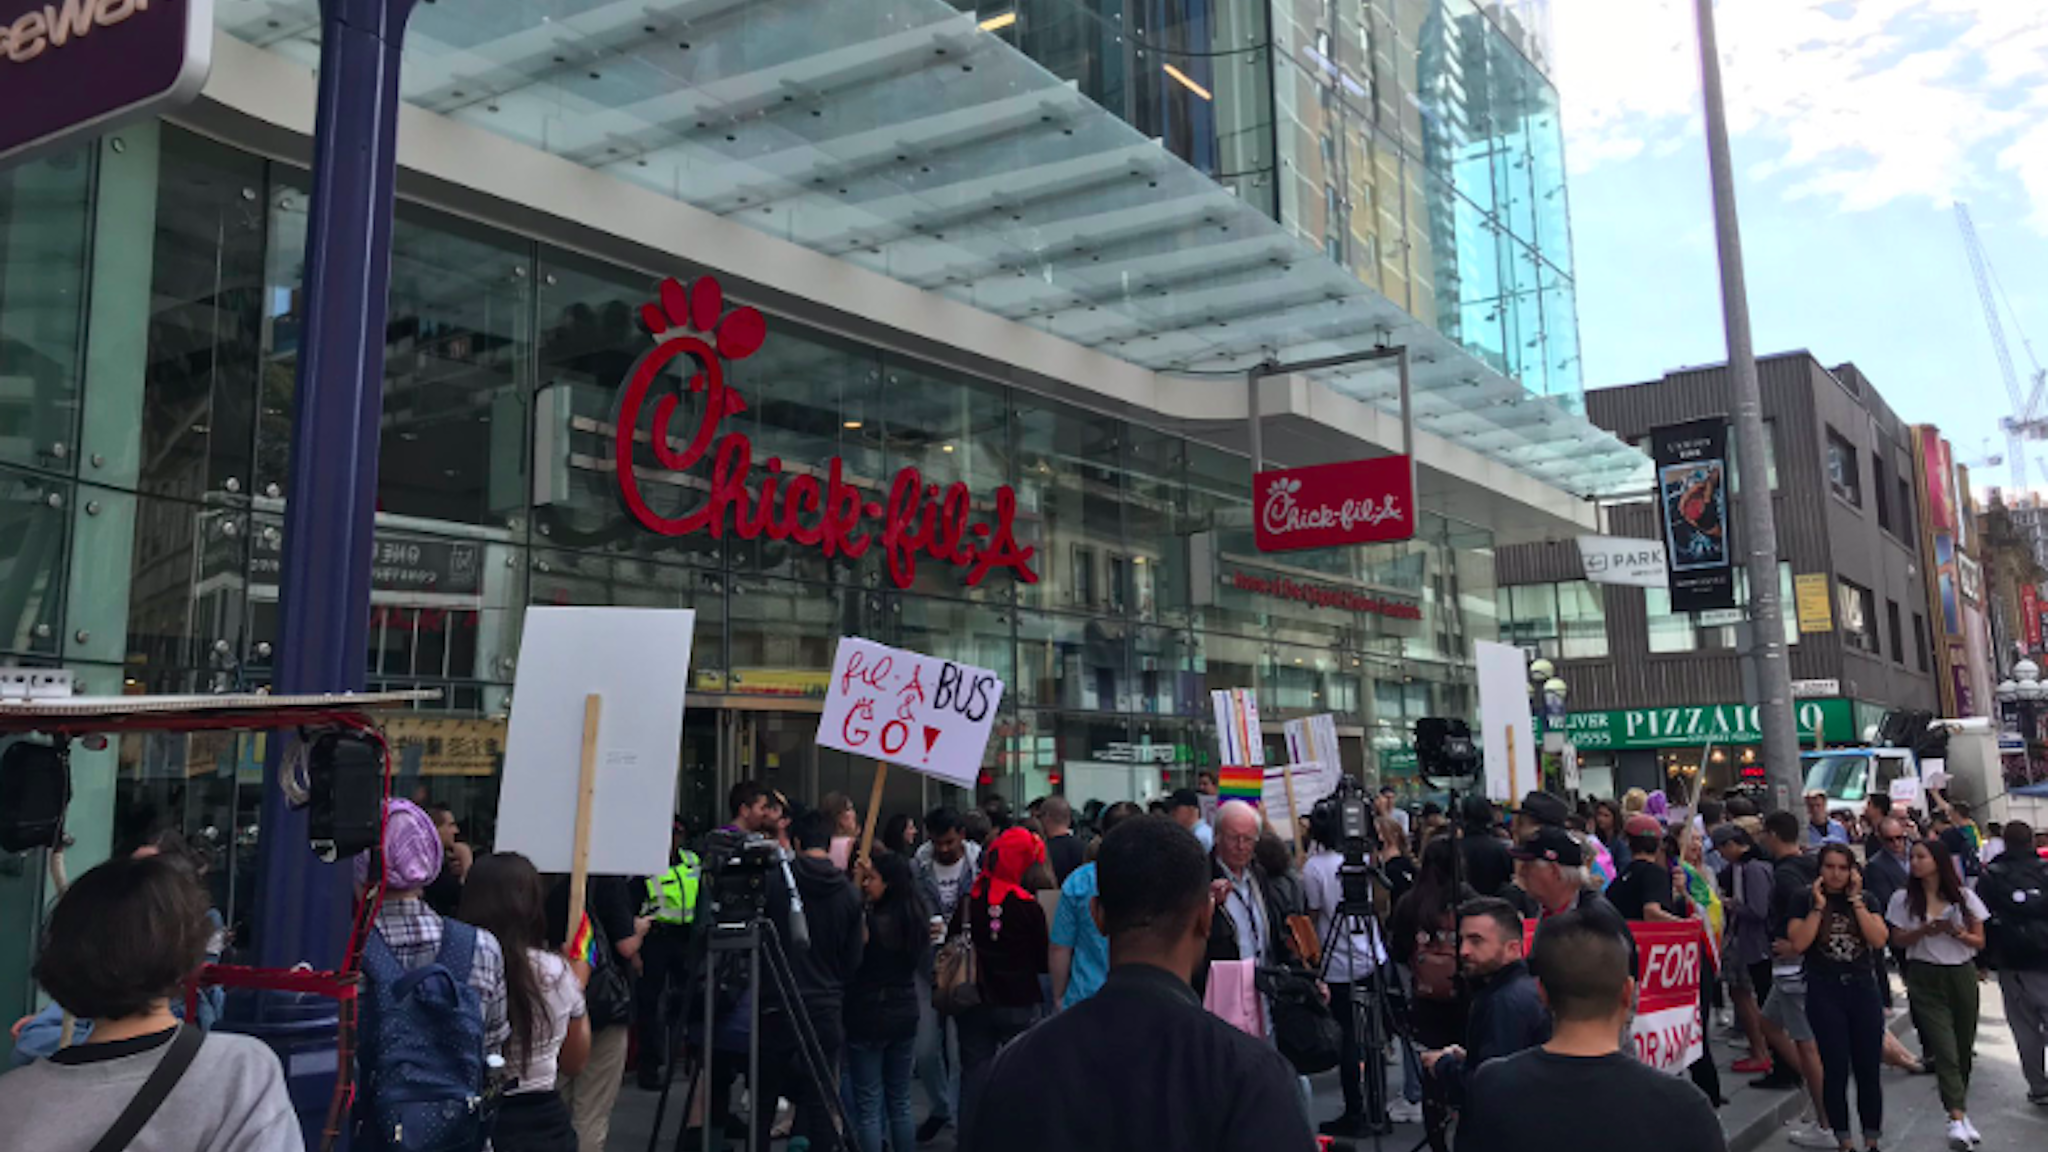 Chick-fil-A grand opening in Toronto, Canada